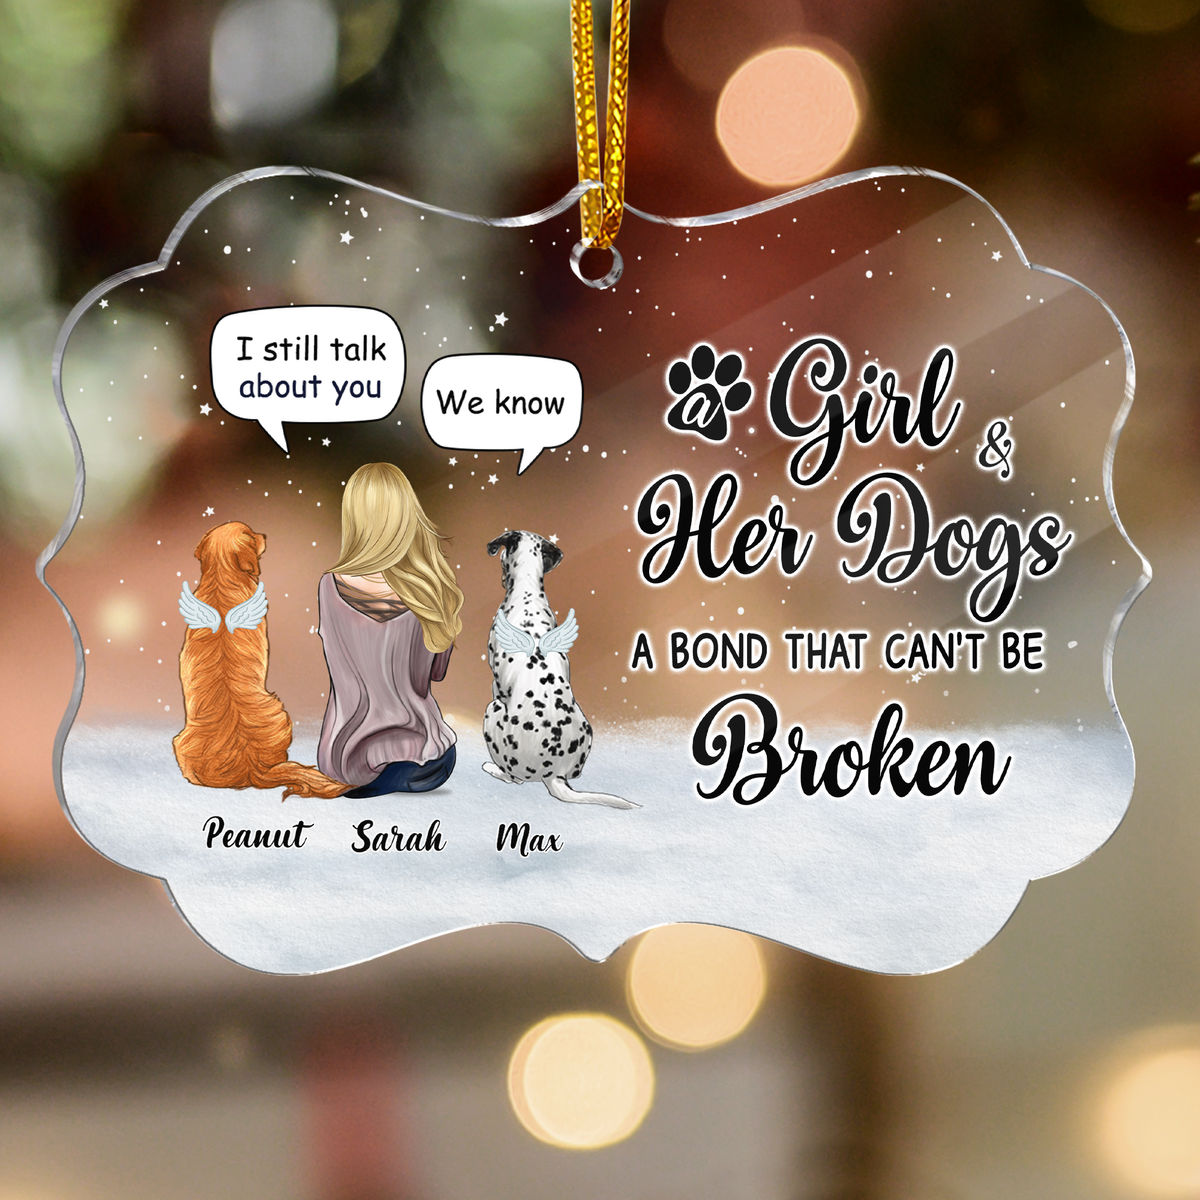 Dog Lover Gifts - A Girl and her dogs a bond that can't be broken (Christmas, Memorial, Loving Gift For Pet Loss Owners)